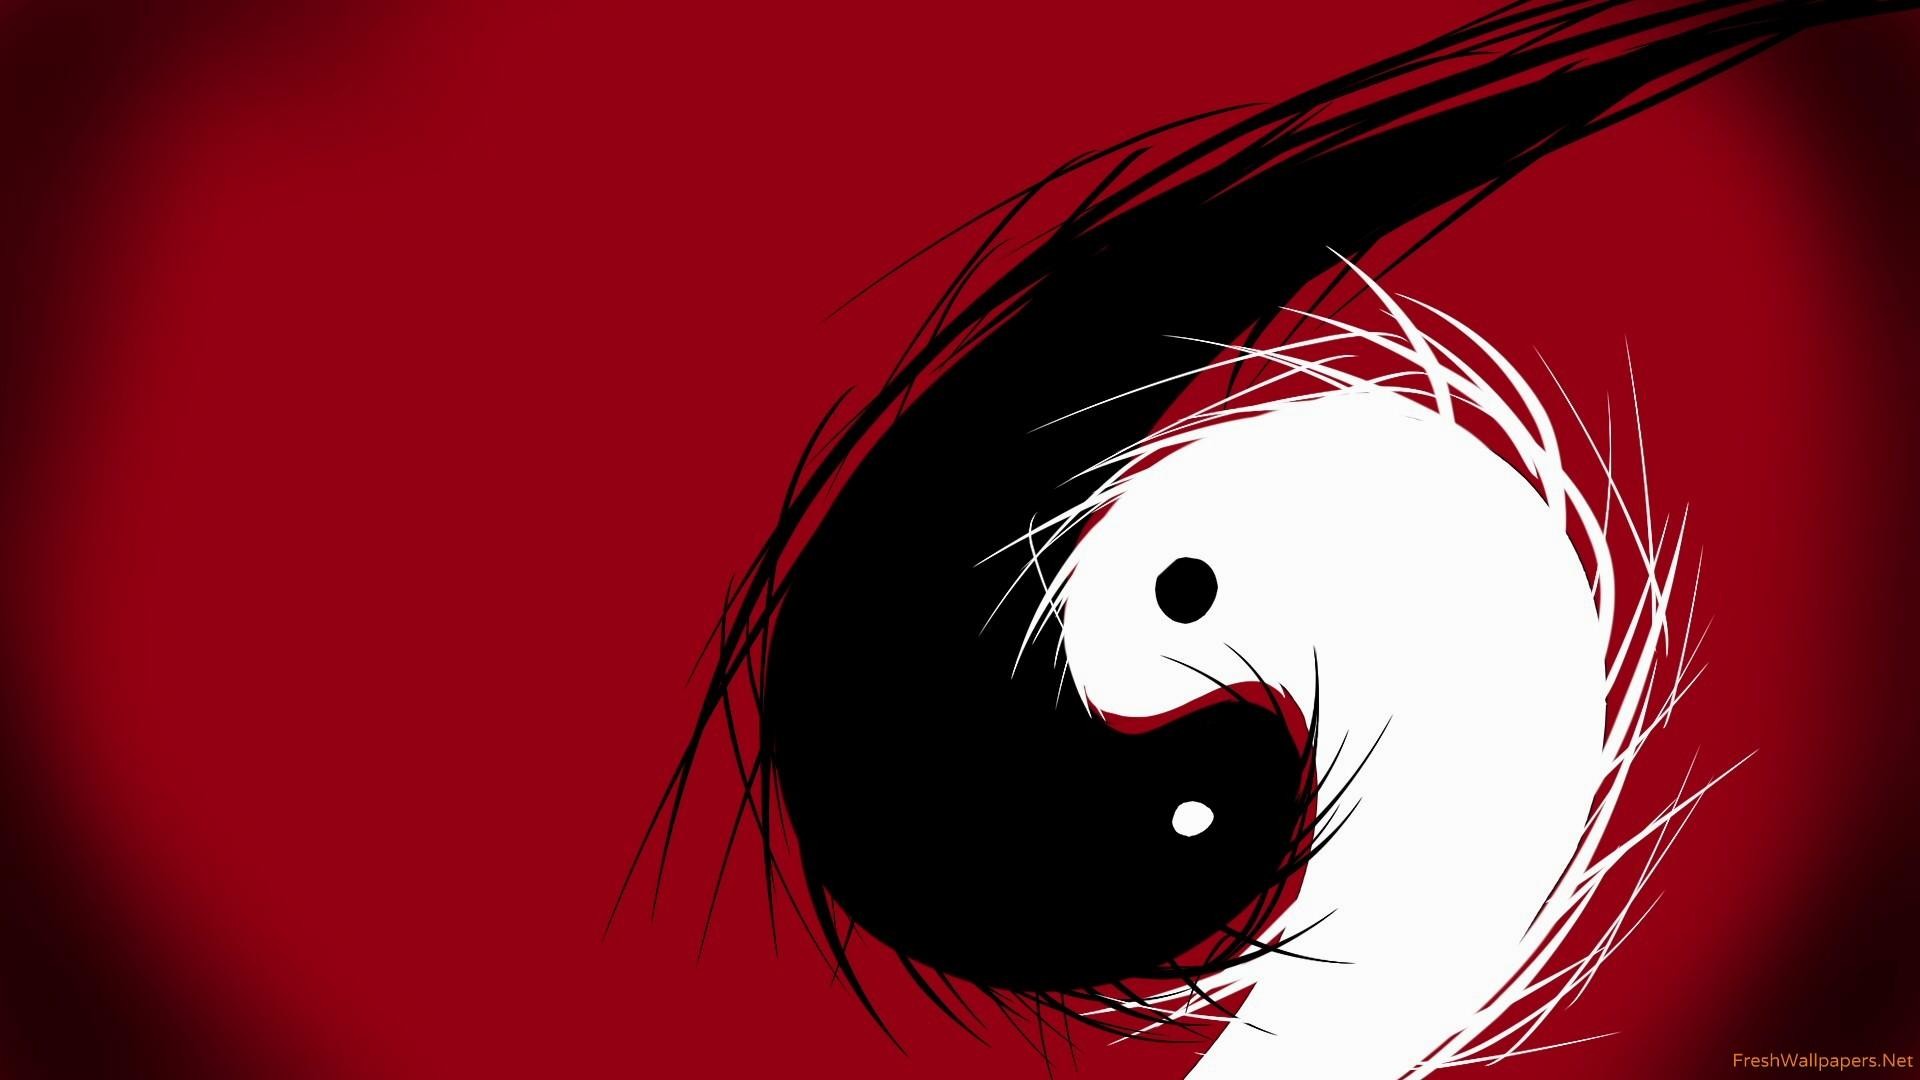 Ying Yang Background Images HD Pictures and Wallpaper For Free Download   Pngtree